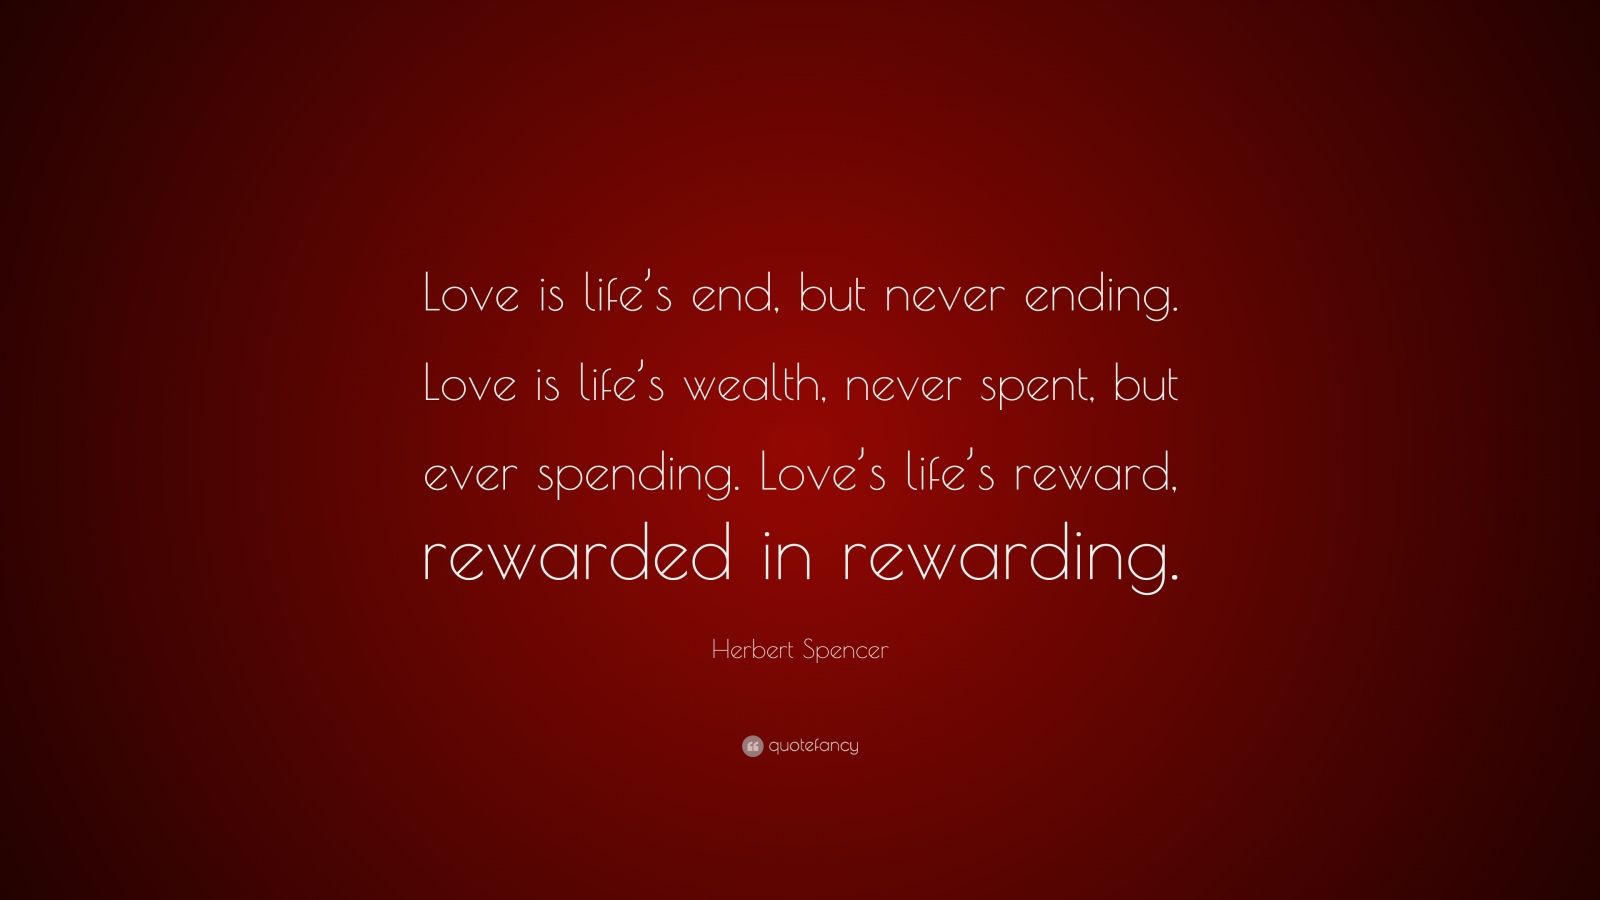 Herbert Spencer Quote “Love is life s end but never ending Love is